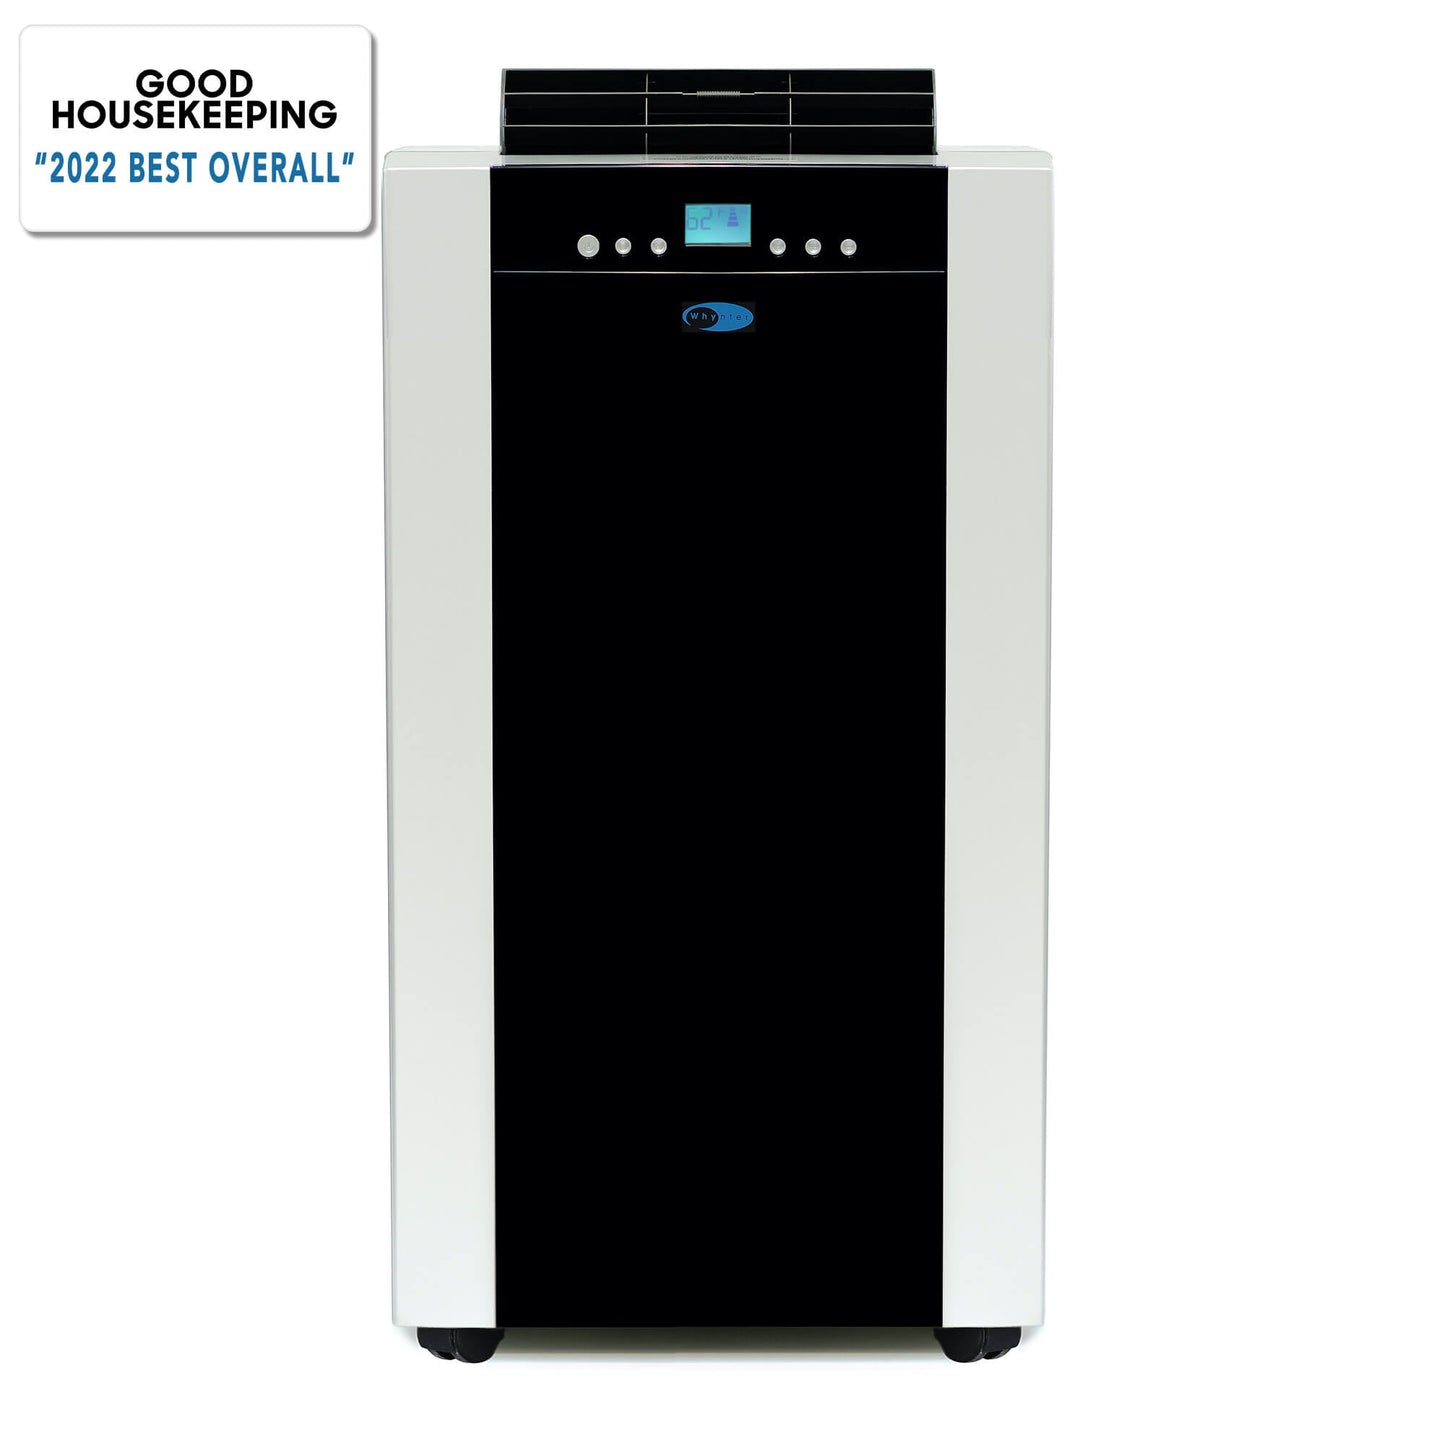 Whynter Air Conditioners Whynter ARC-14SH 14,000 BTU (9,000 BTU SACC) Dual Hose Cooling Portable Air Conditioner, Heater, Dehumidifier, and Fan with Activated Carbon Filter plus Storage bag, up to 500 sq ft in Platinum/Black